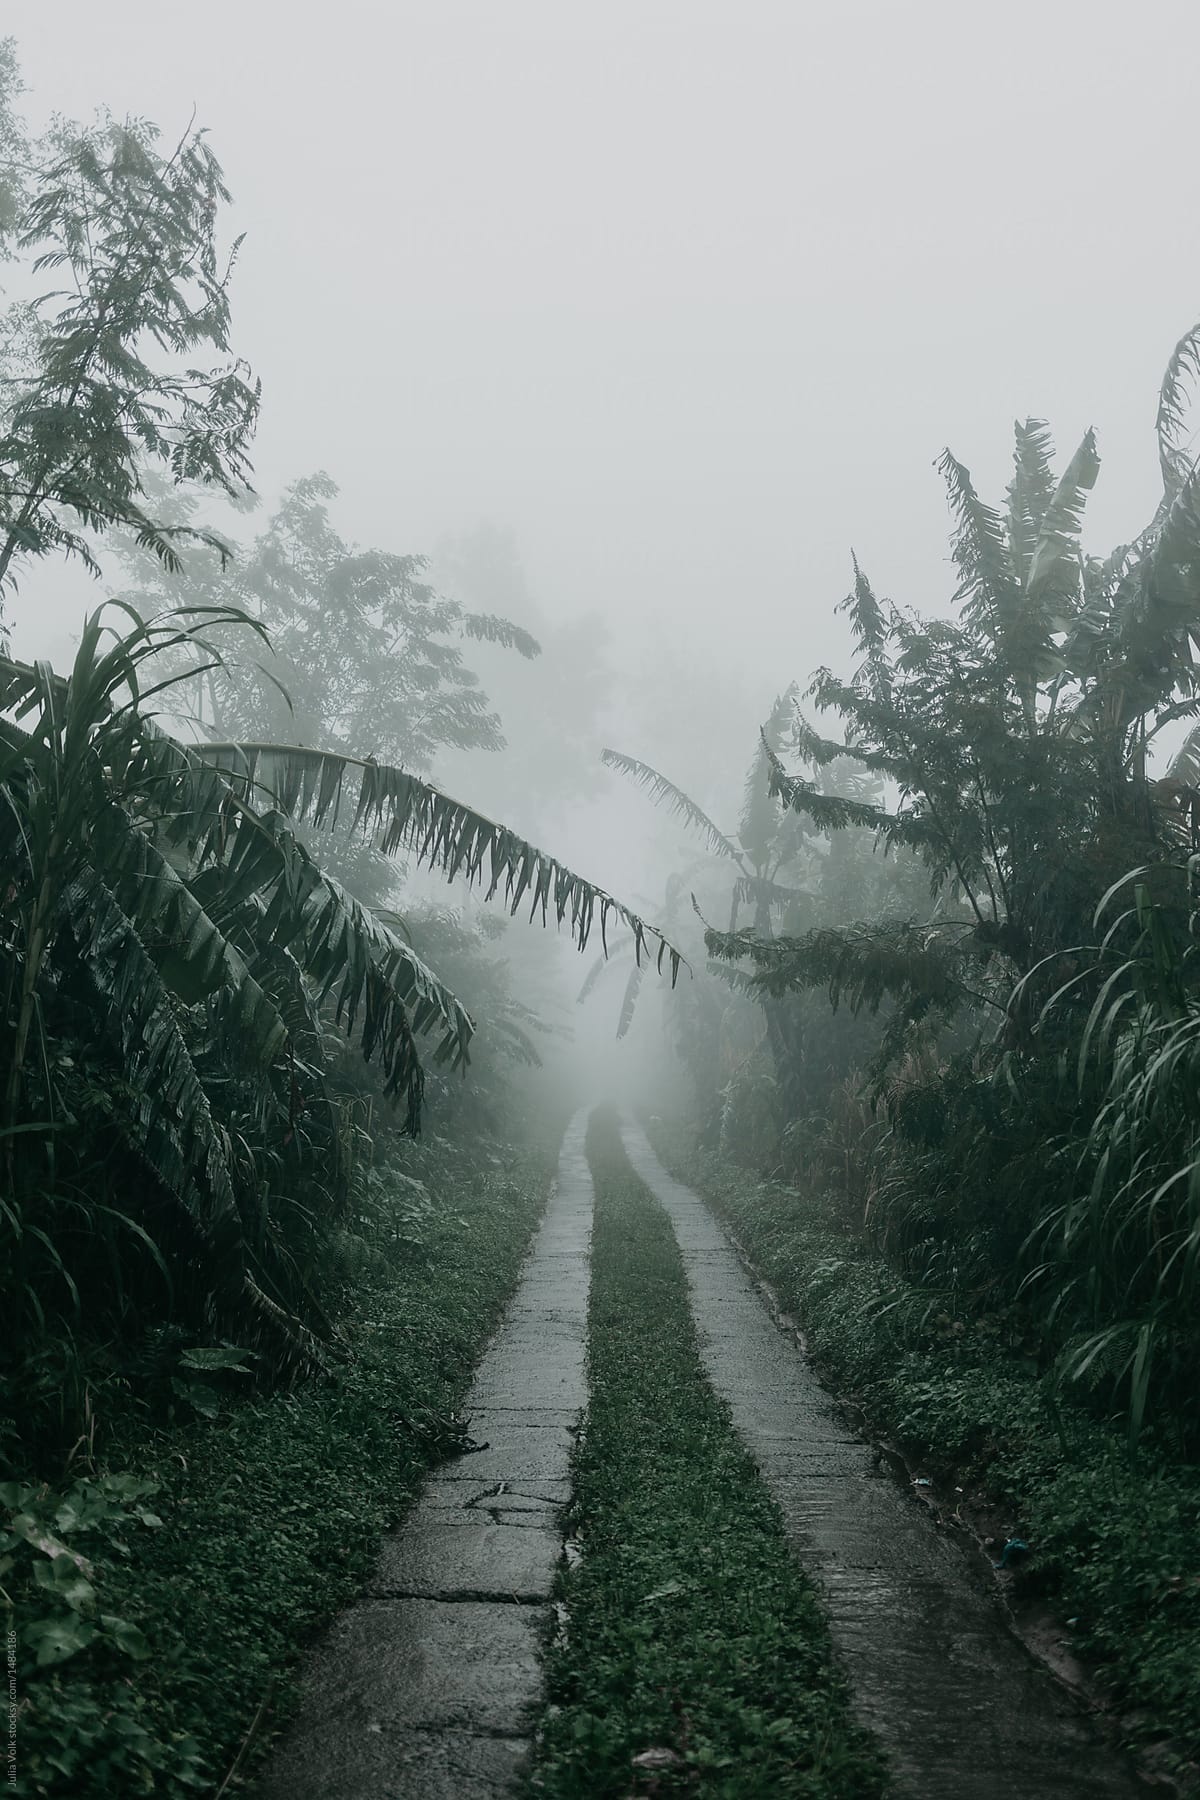 Rain in tropical forest